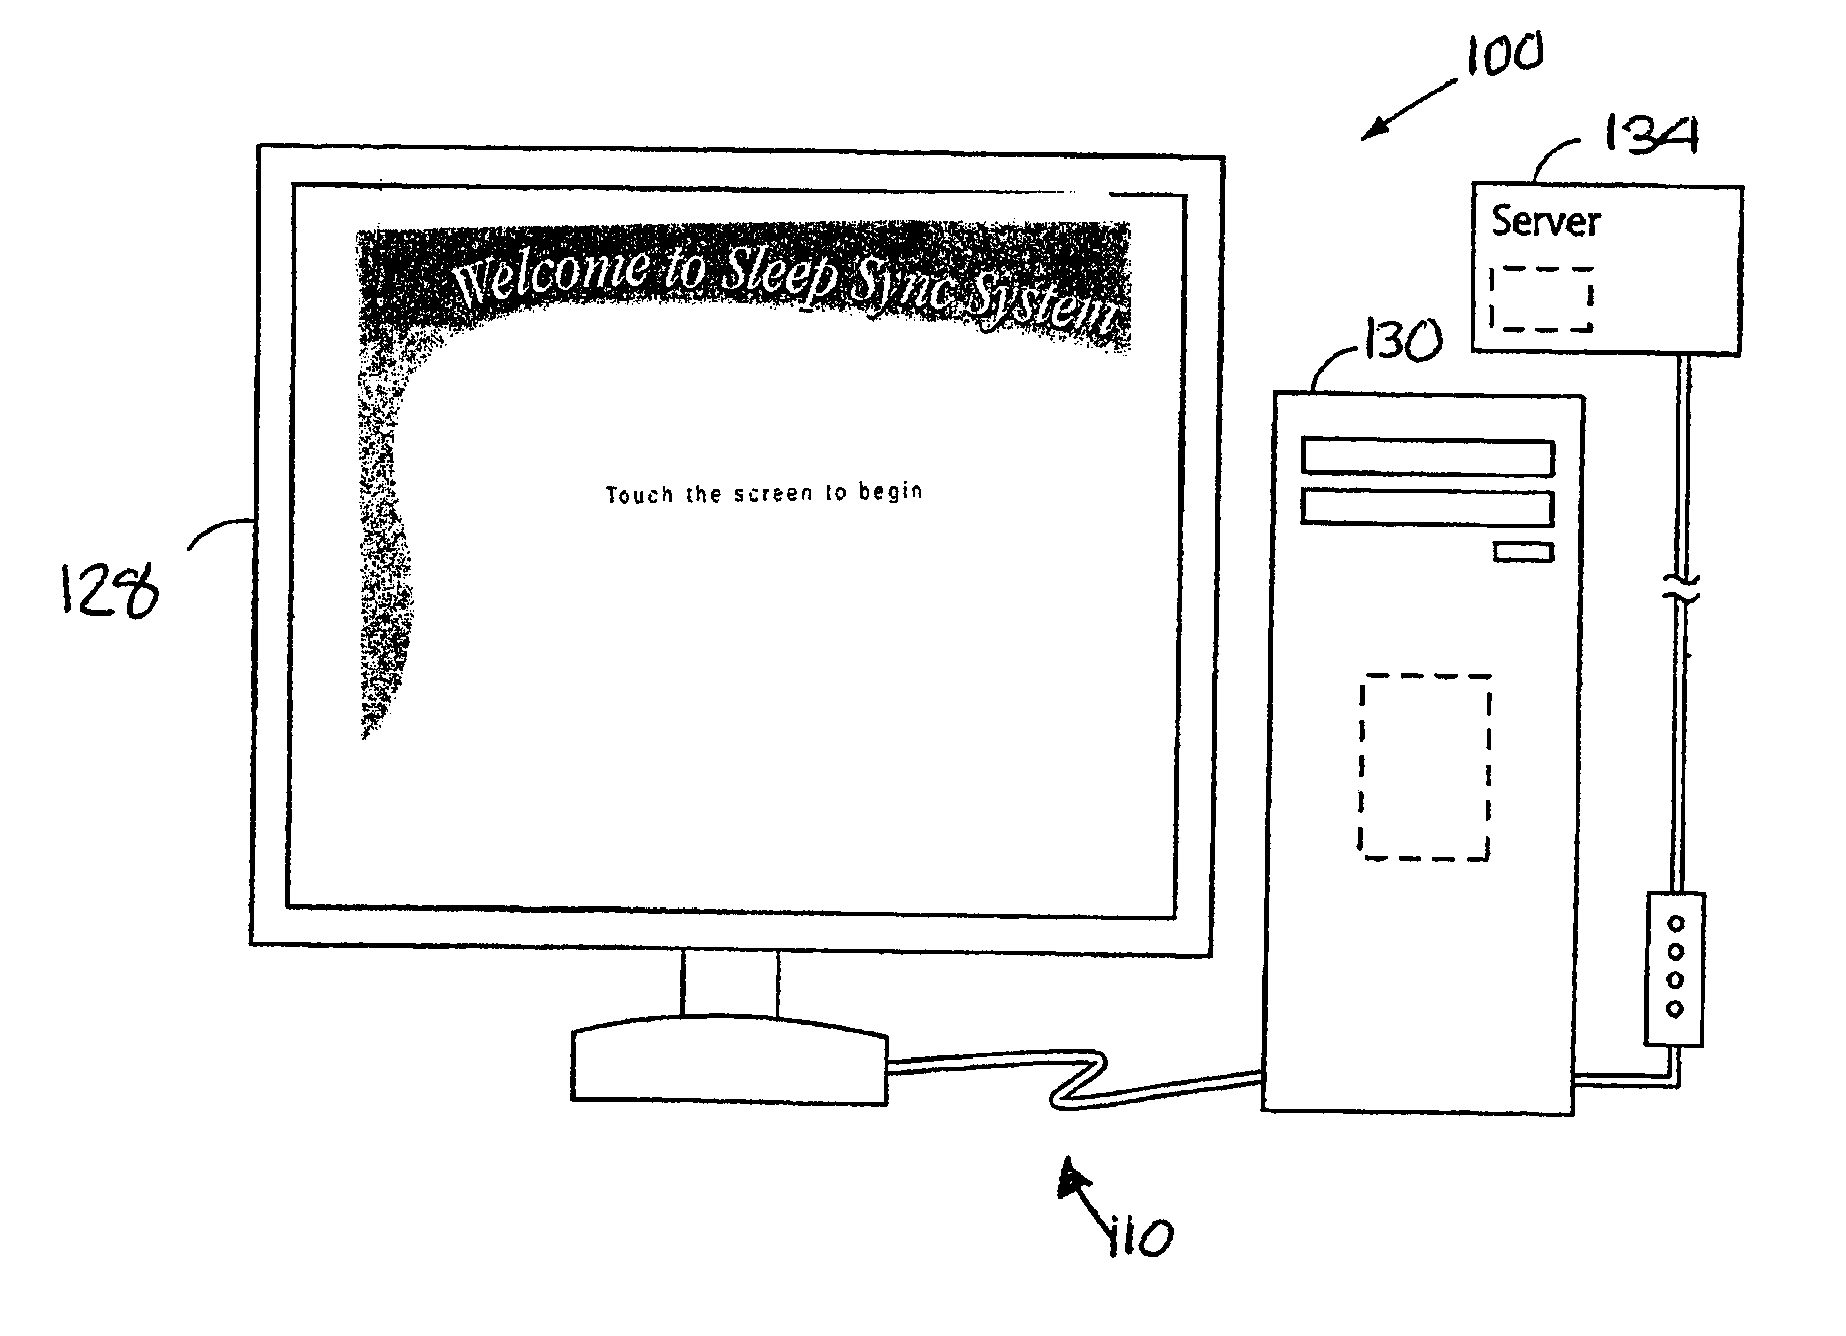 System and Method for Selecting a Pillow and Mattress